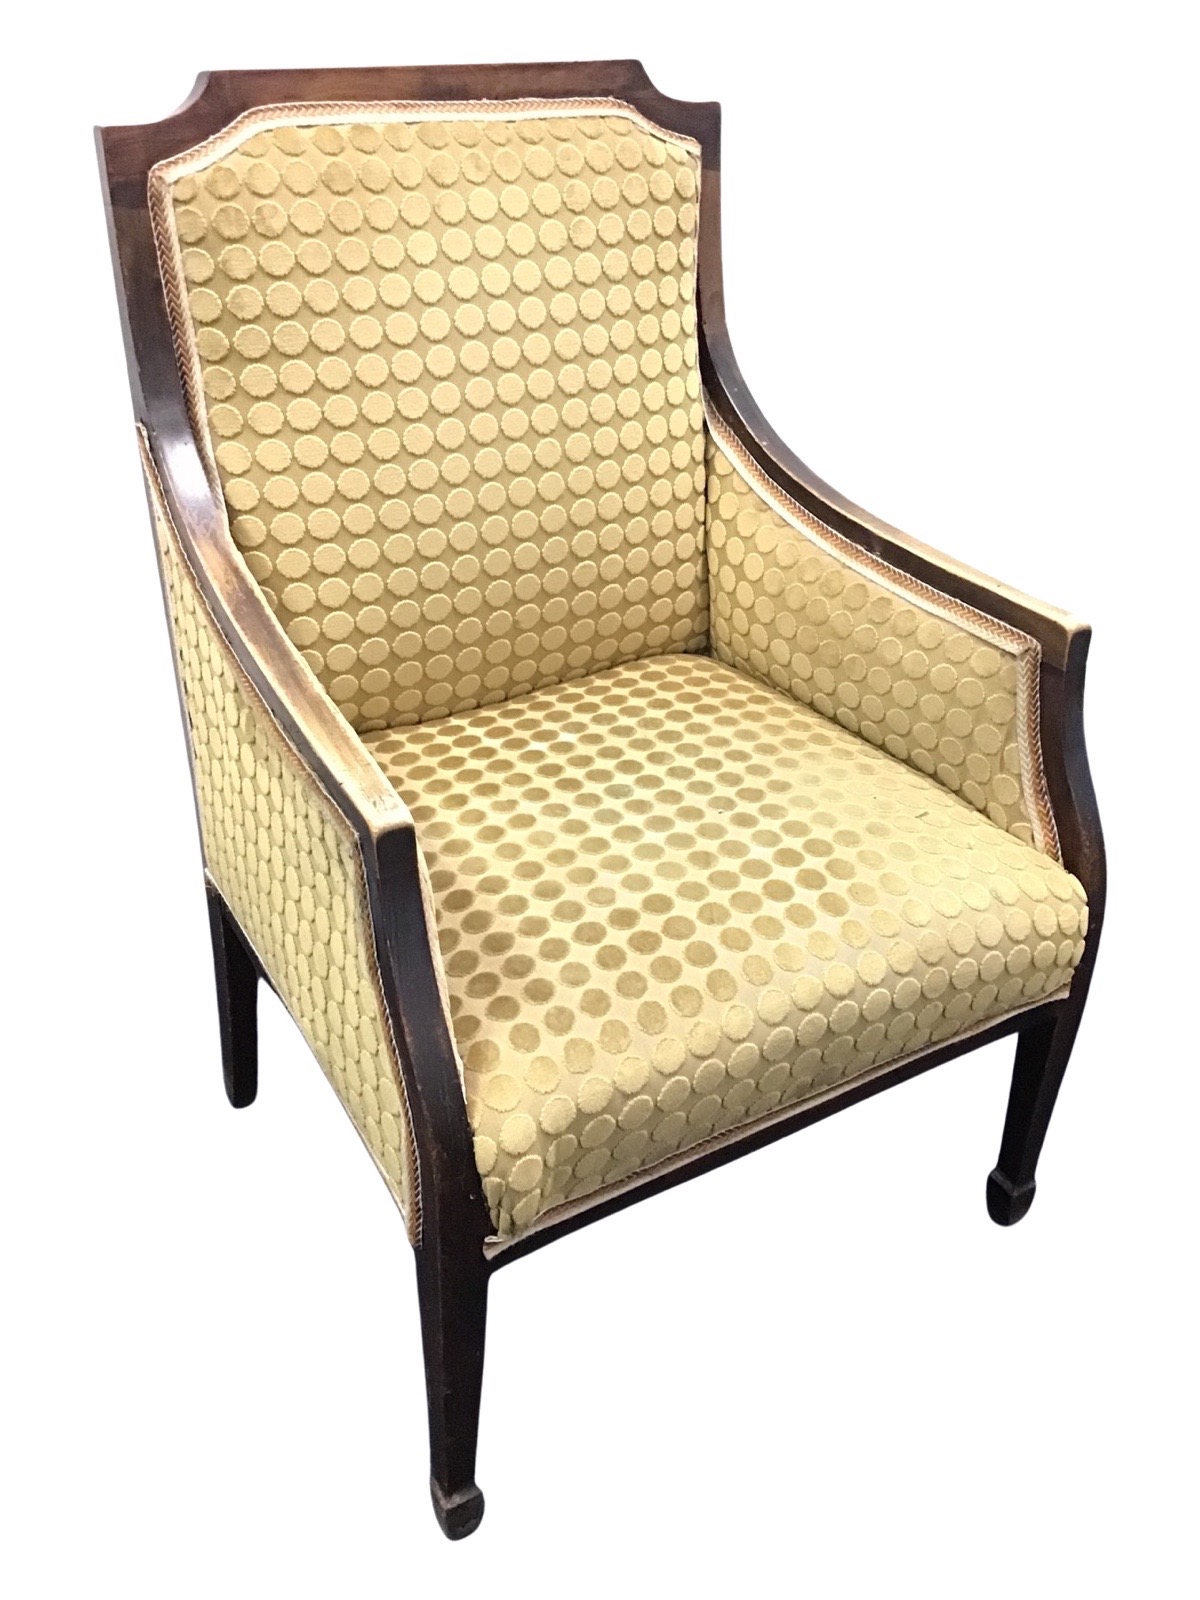 An Edwardian mahogany upholstered armchair, with downswept arms above a sprung seat, raised on